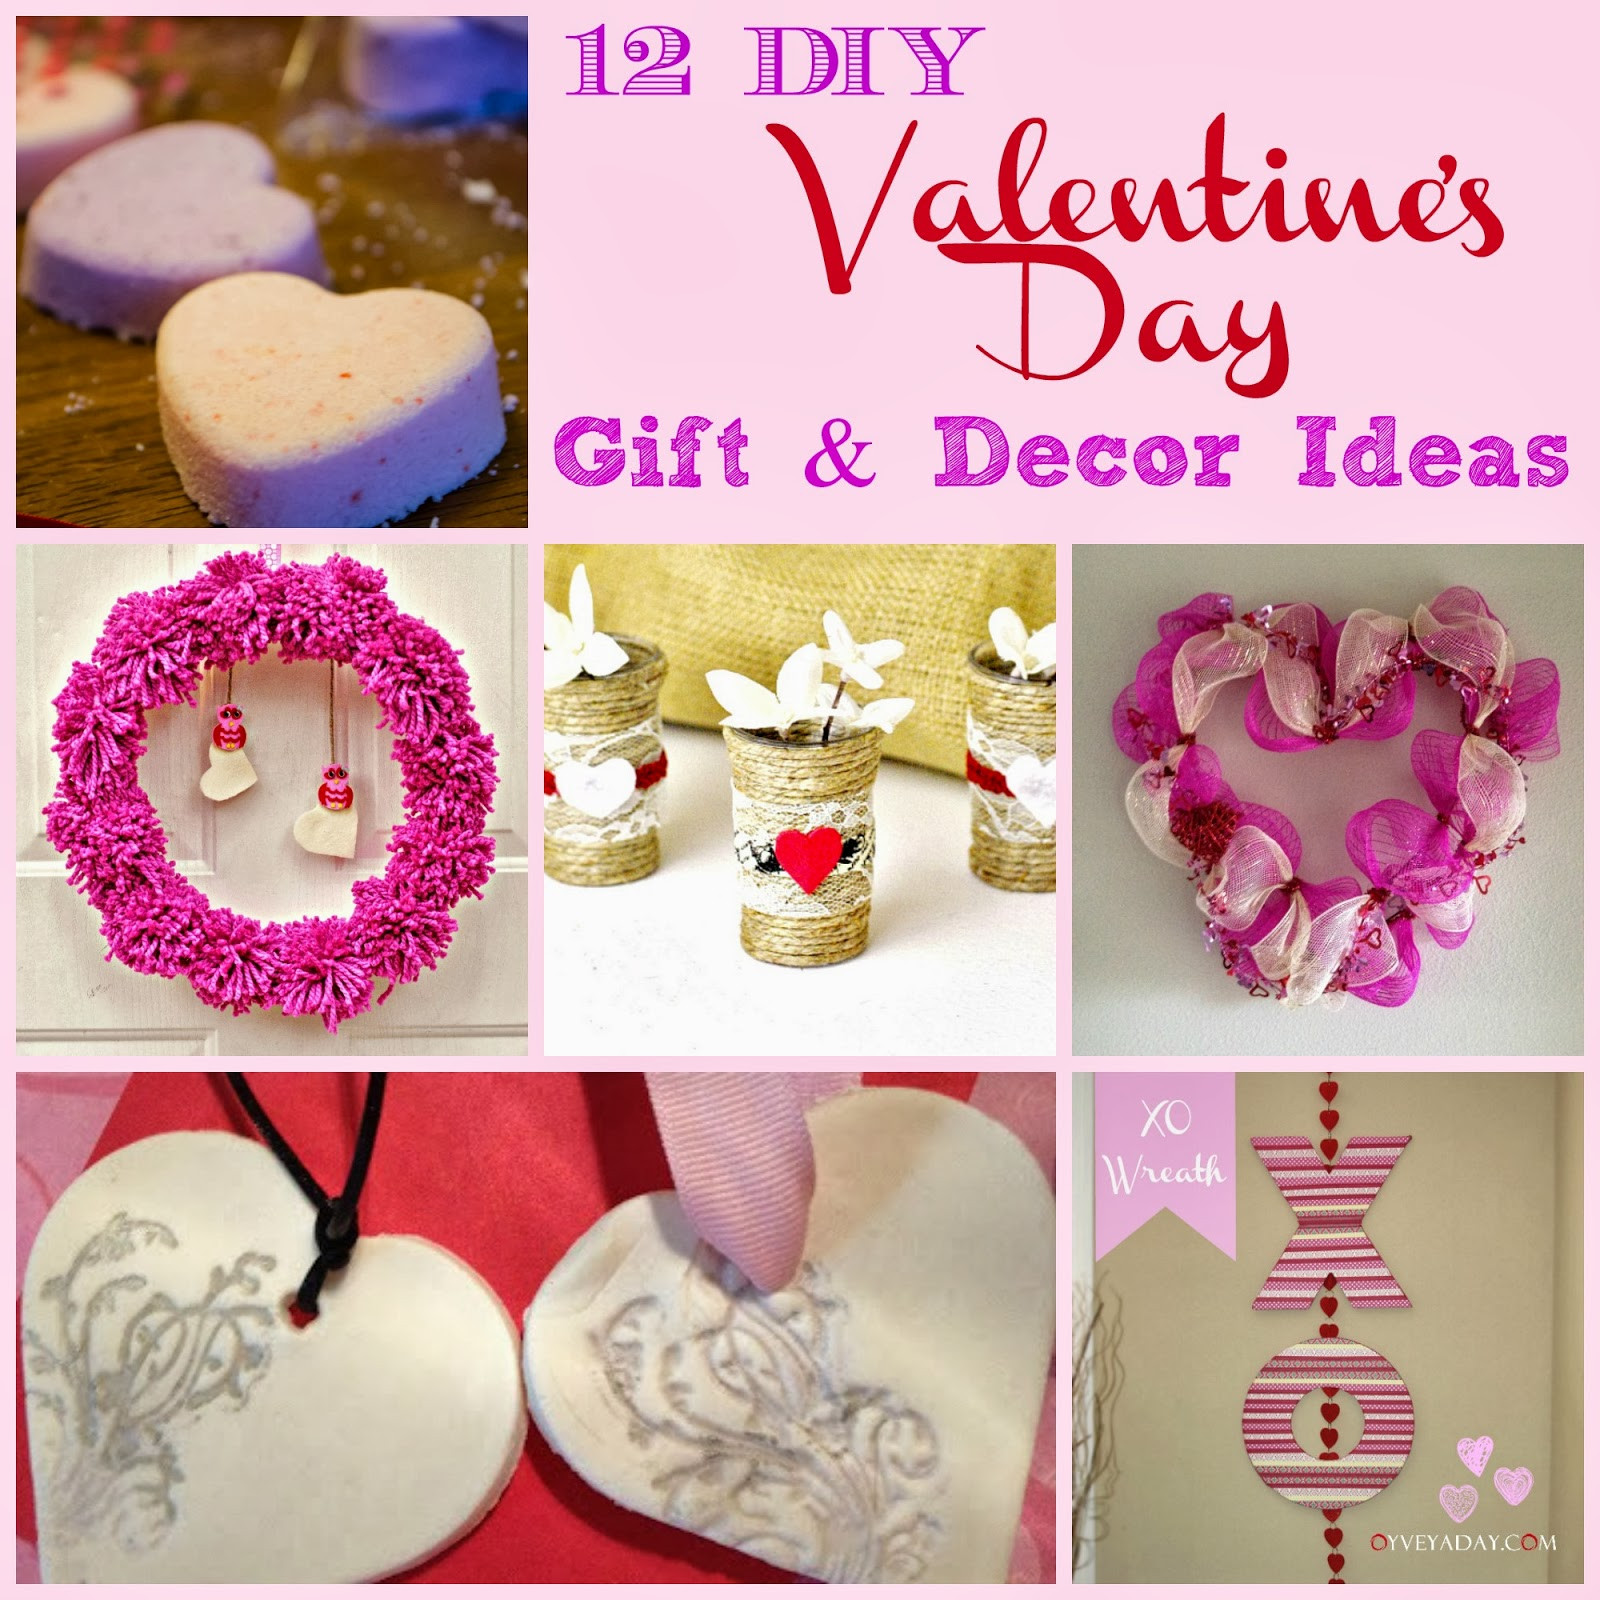 Valentine Homemade Gift Ideas
 12 DIY Valentine s Day Gift & Decor Ideas Outnumbered 3 to 1